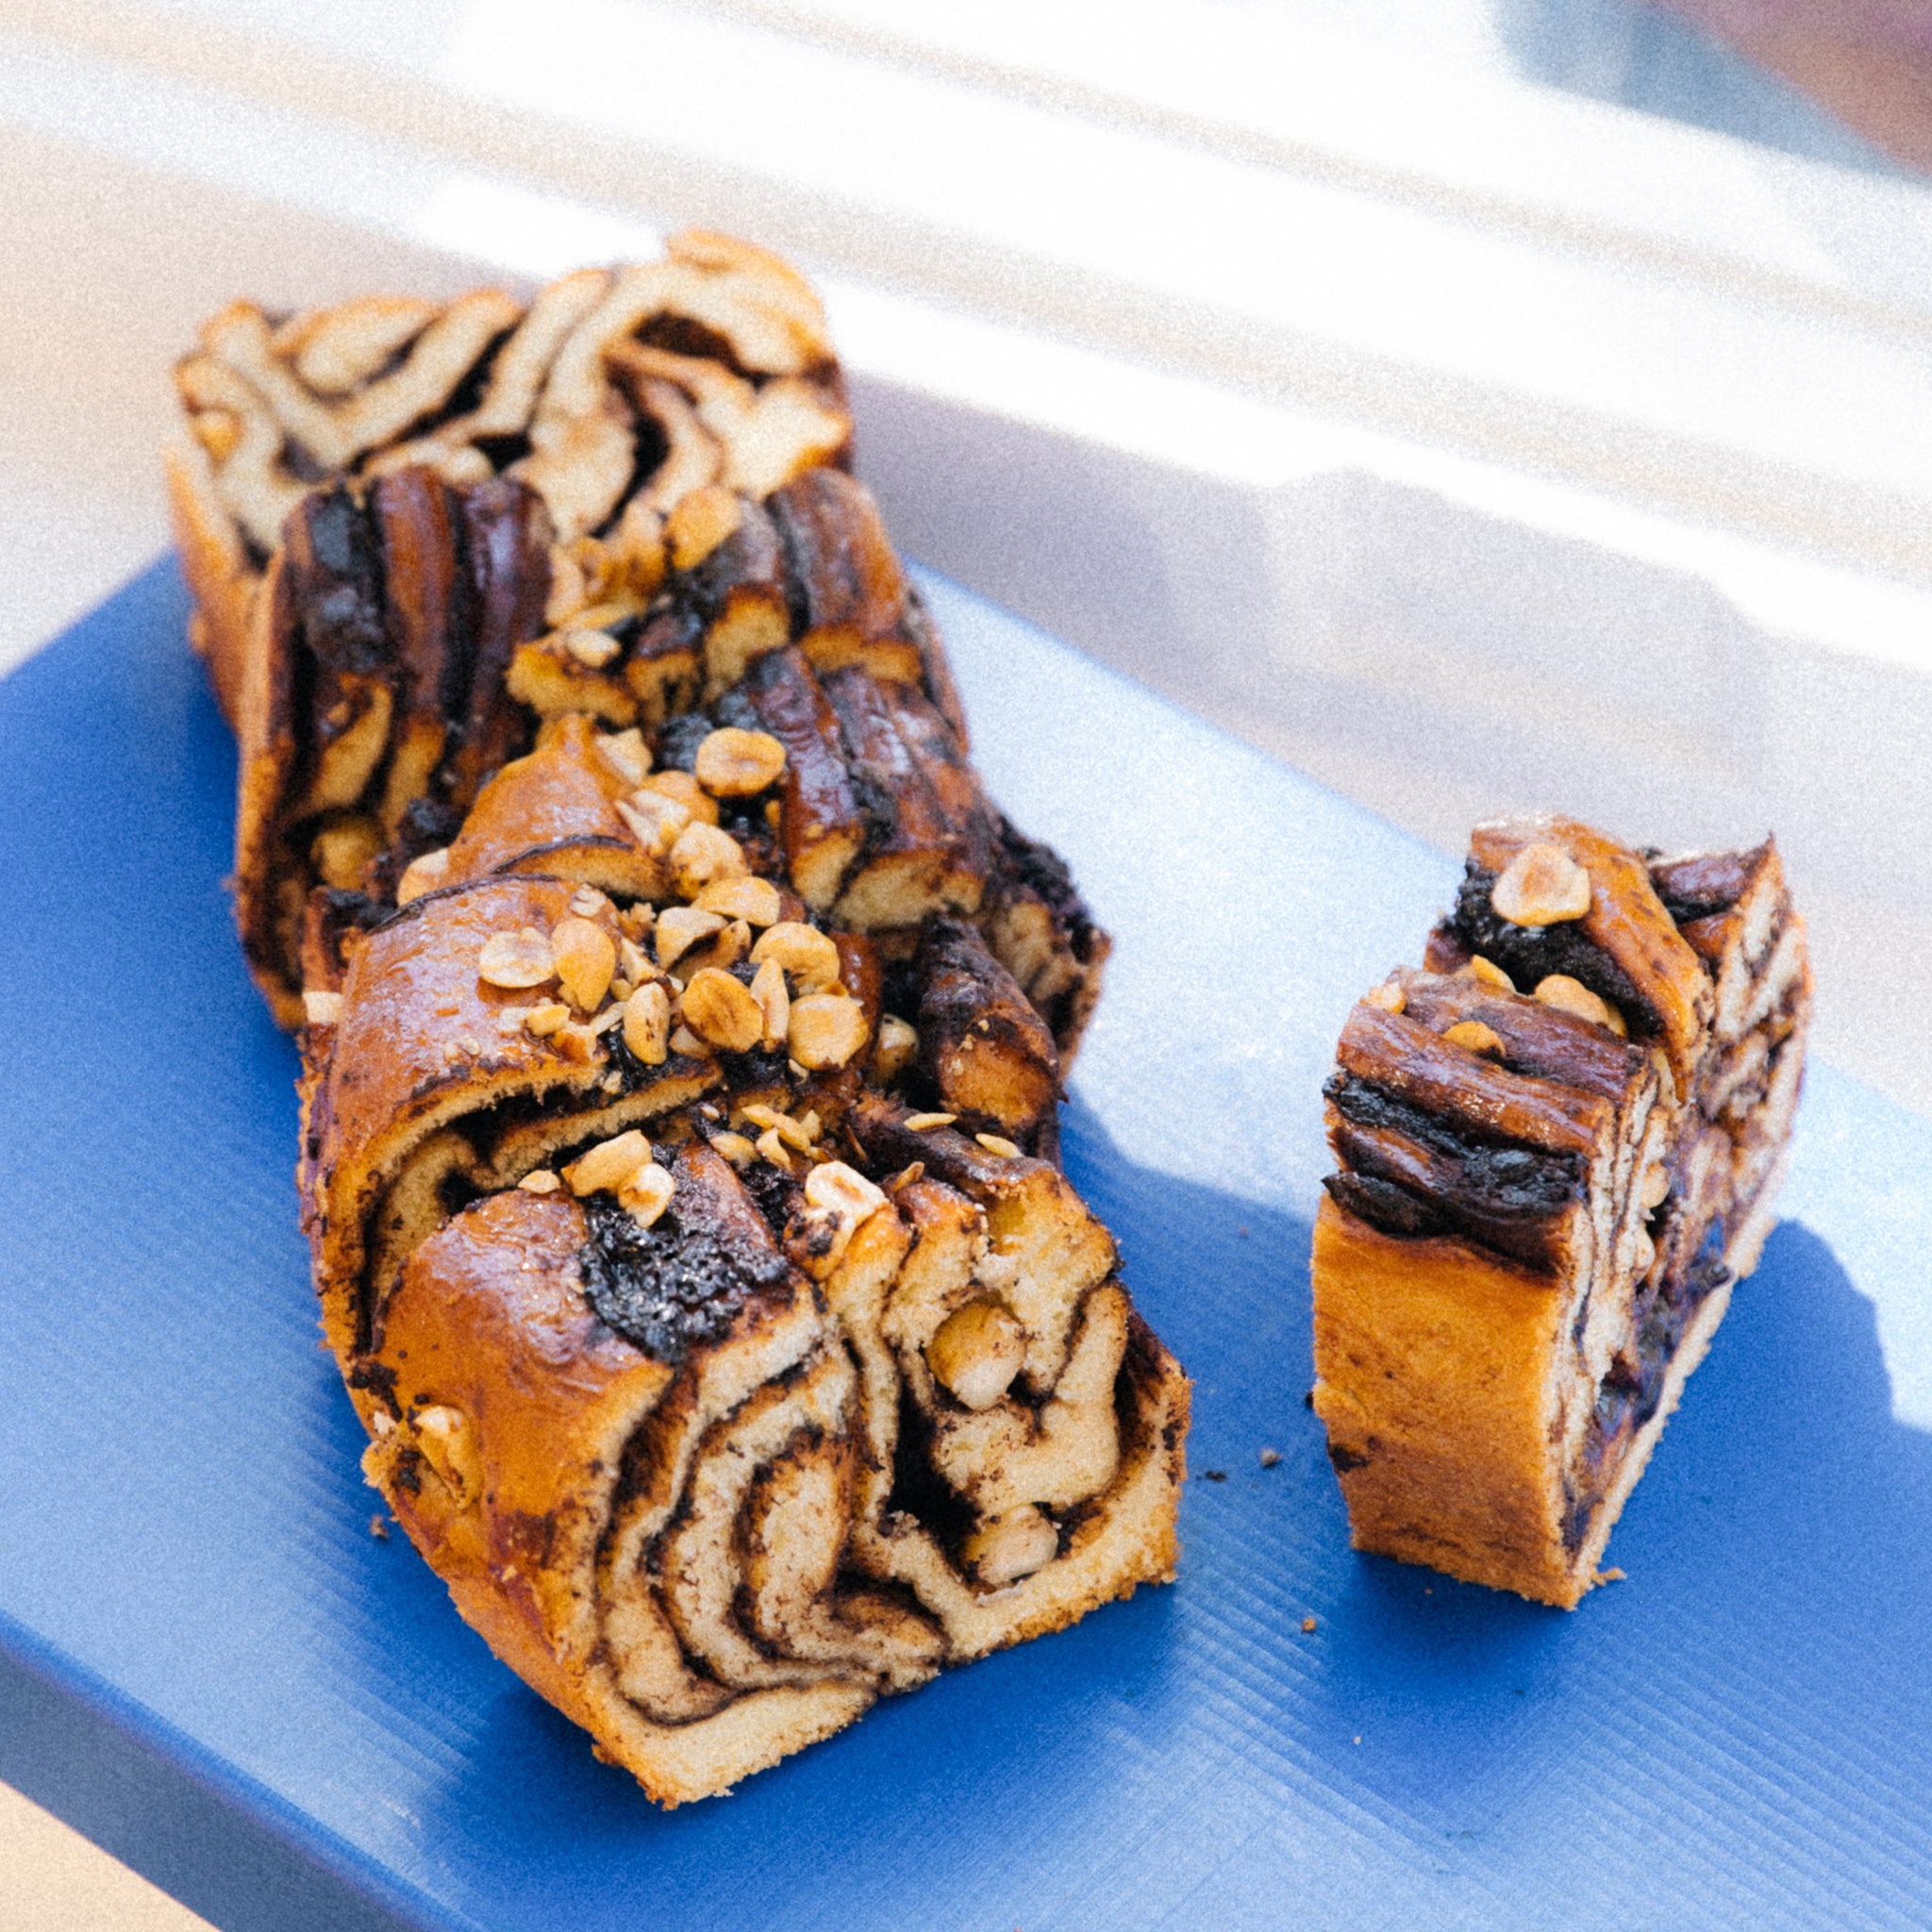 Brioche filled with dark chocolate and hazelnuts. Our babka has a rich, soft dough, sweetened with organic coconut palm sugar and a luscious caramelized crust.   100% plant-based & vegan-friendly | Allergens: Gluten & nuts.